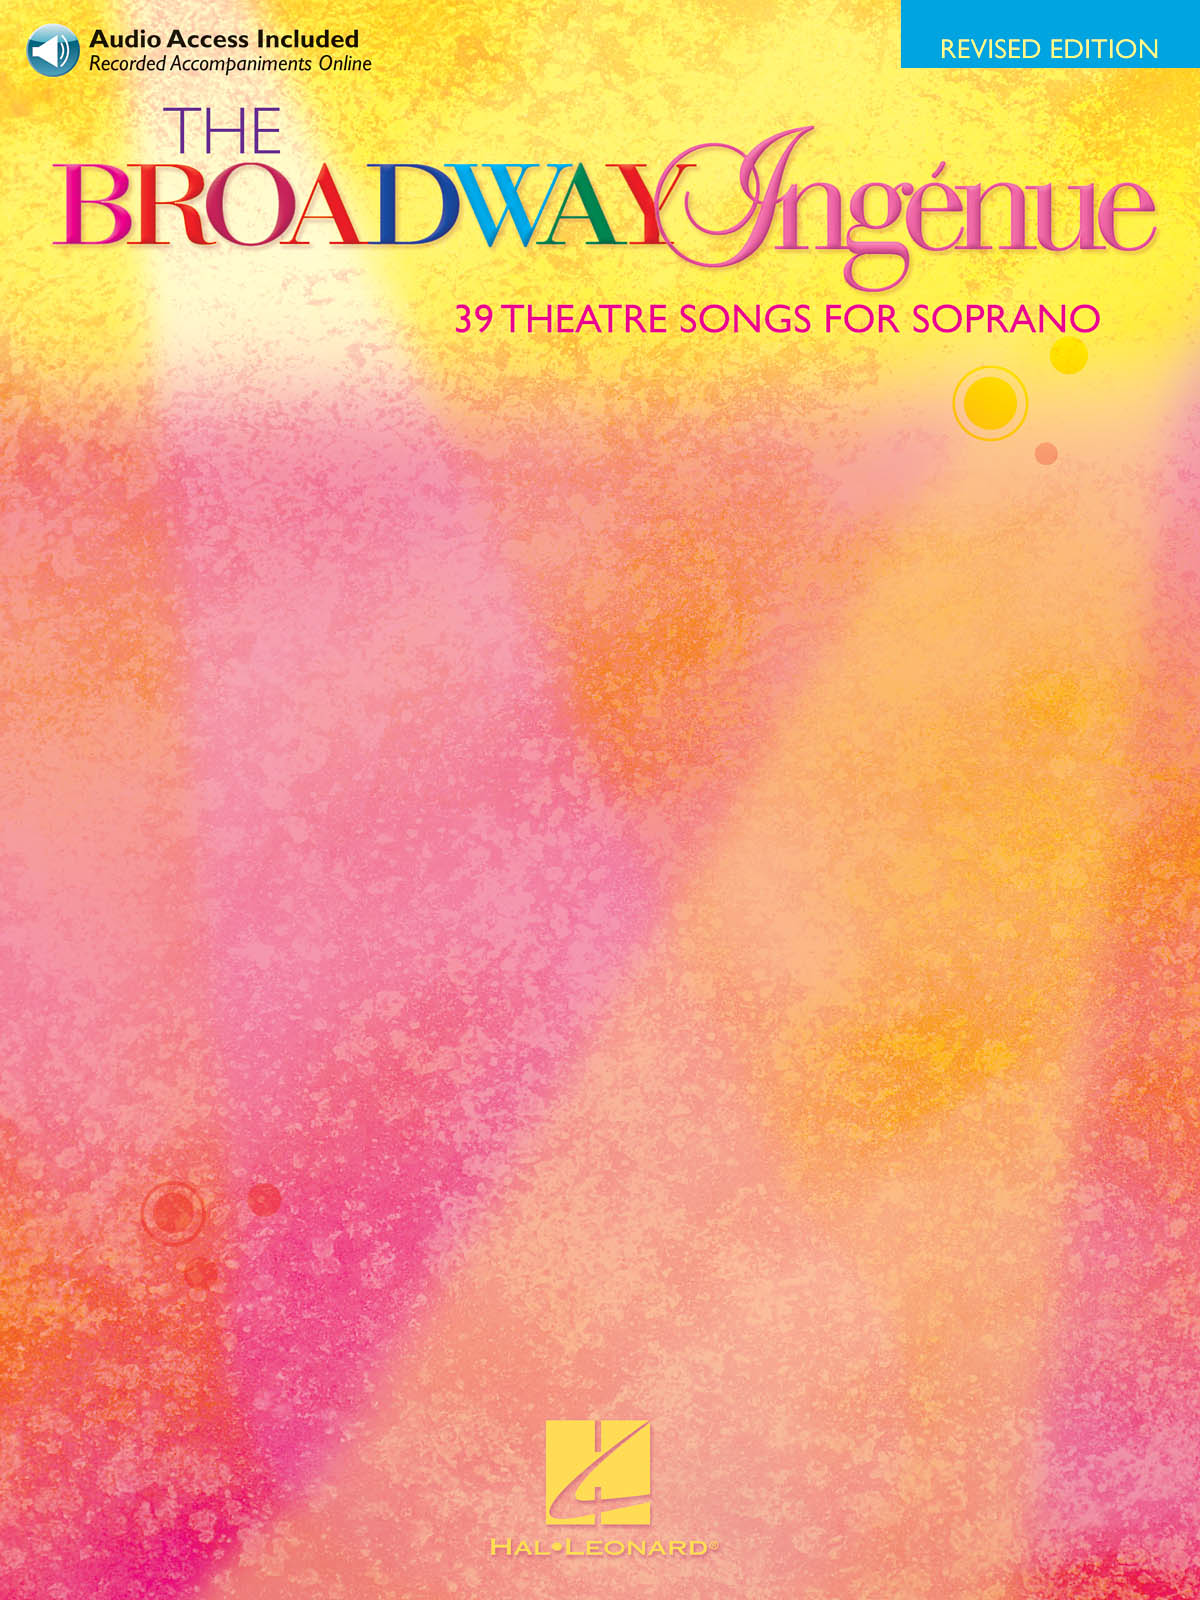 The Broadway Ing?nue - Revised Edition: Vocal Solo: Vocal Album